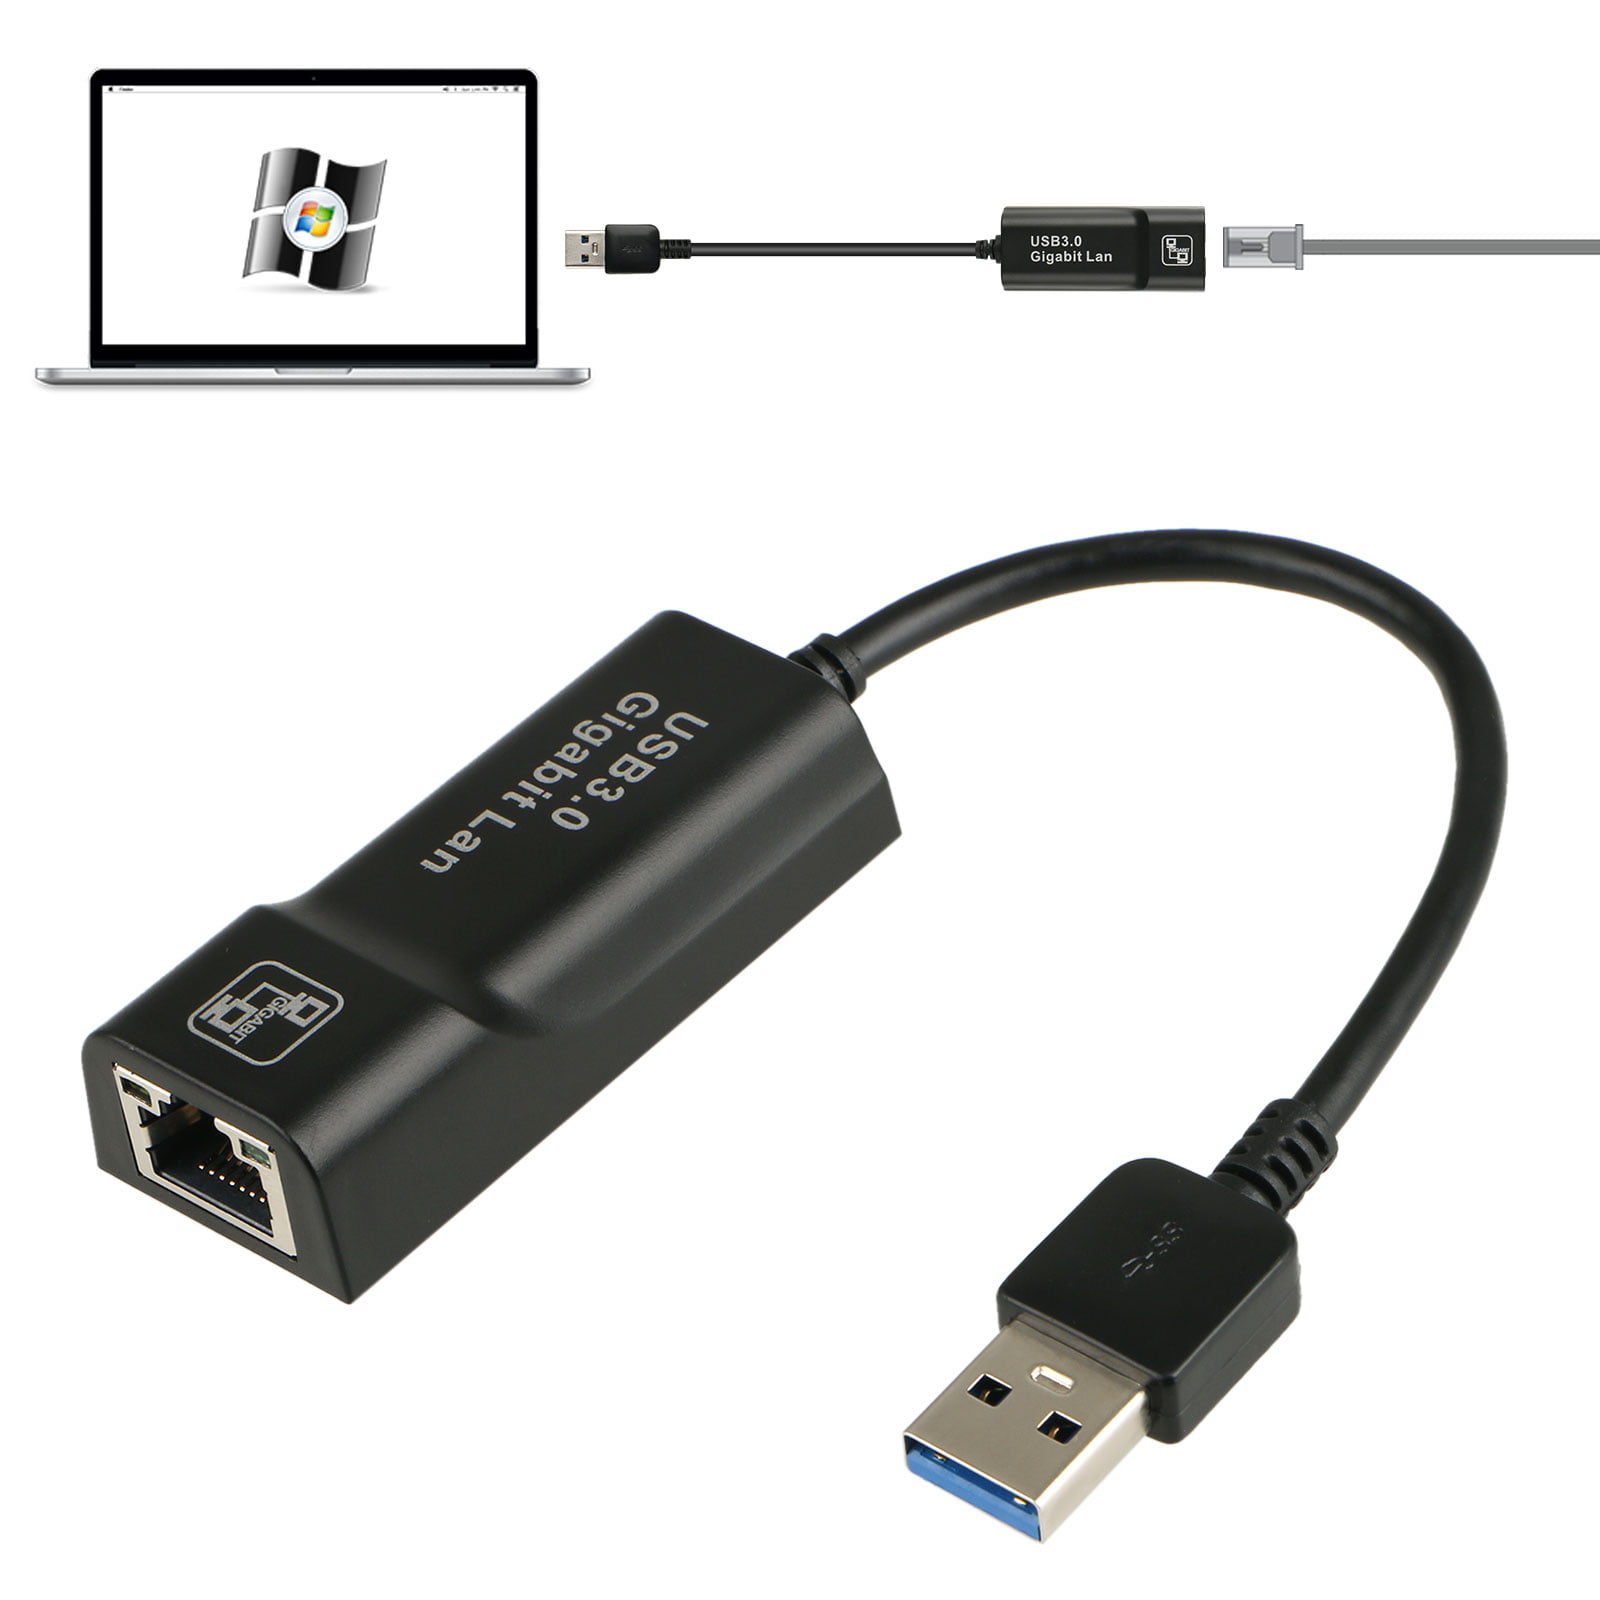 ethernet adapter for surface pro 7